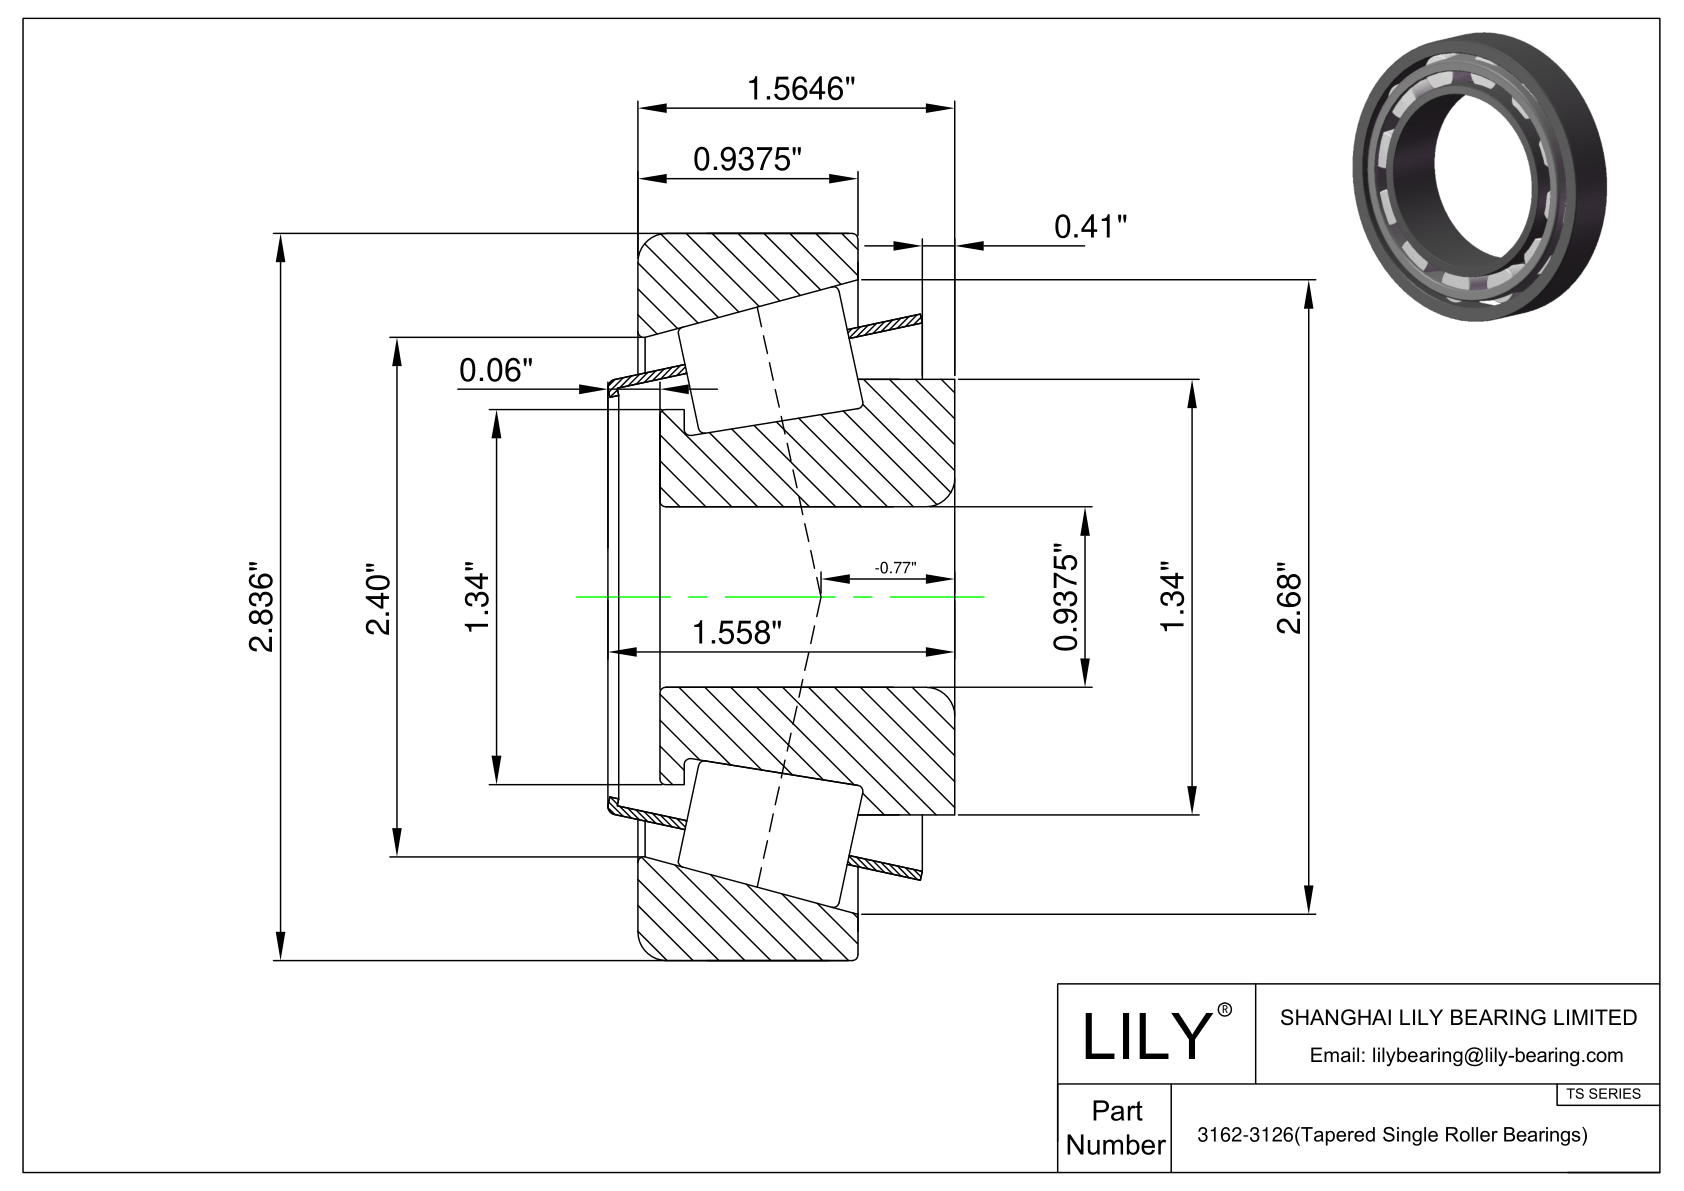 3162-3126 TS (Tapered Single Roller Bearings) (Imperial) cad drawing